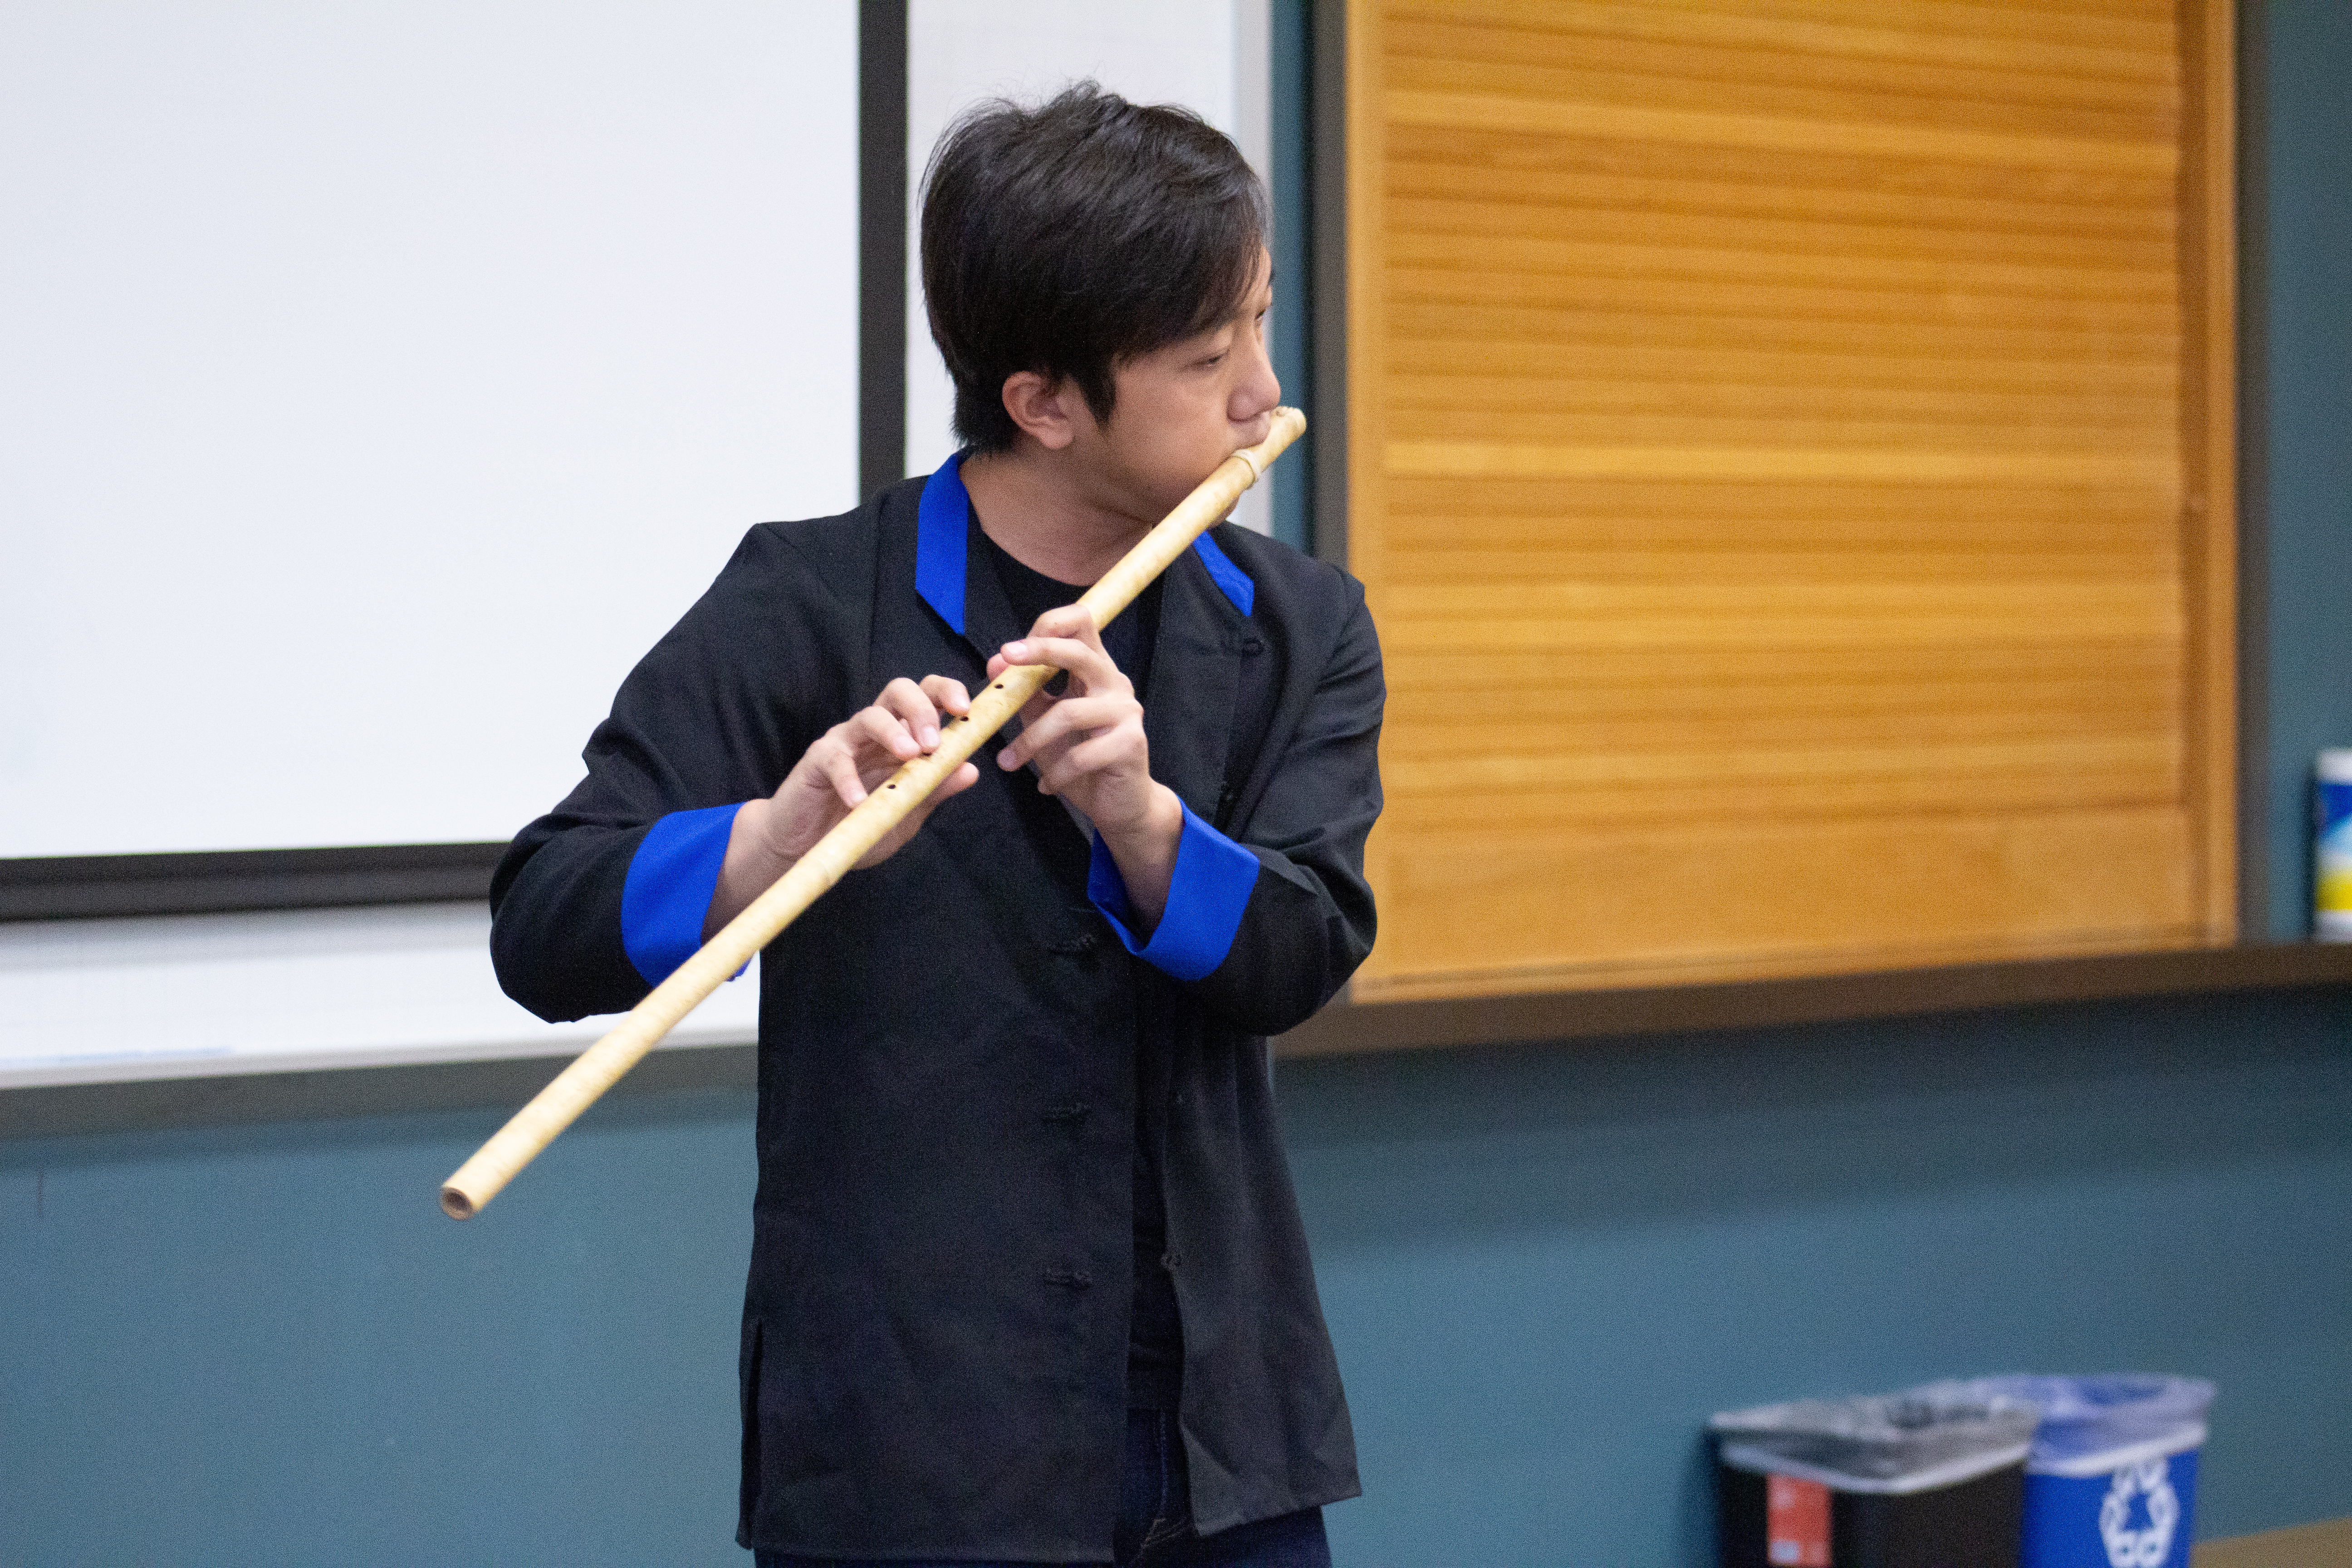 Neng Now, a HMong man with short hair wearing a black jacket with blue cuffs plays  a traditional wooden flute.